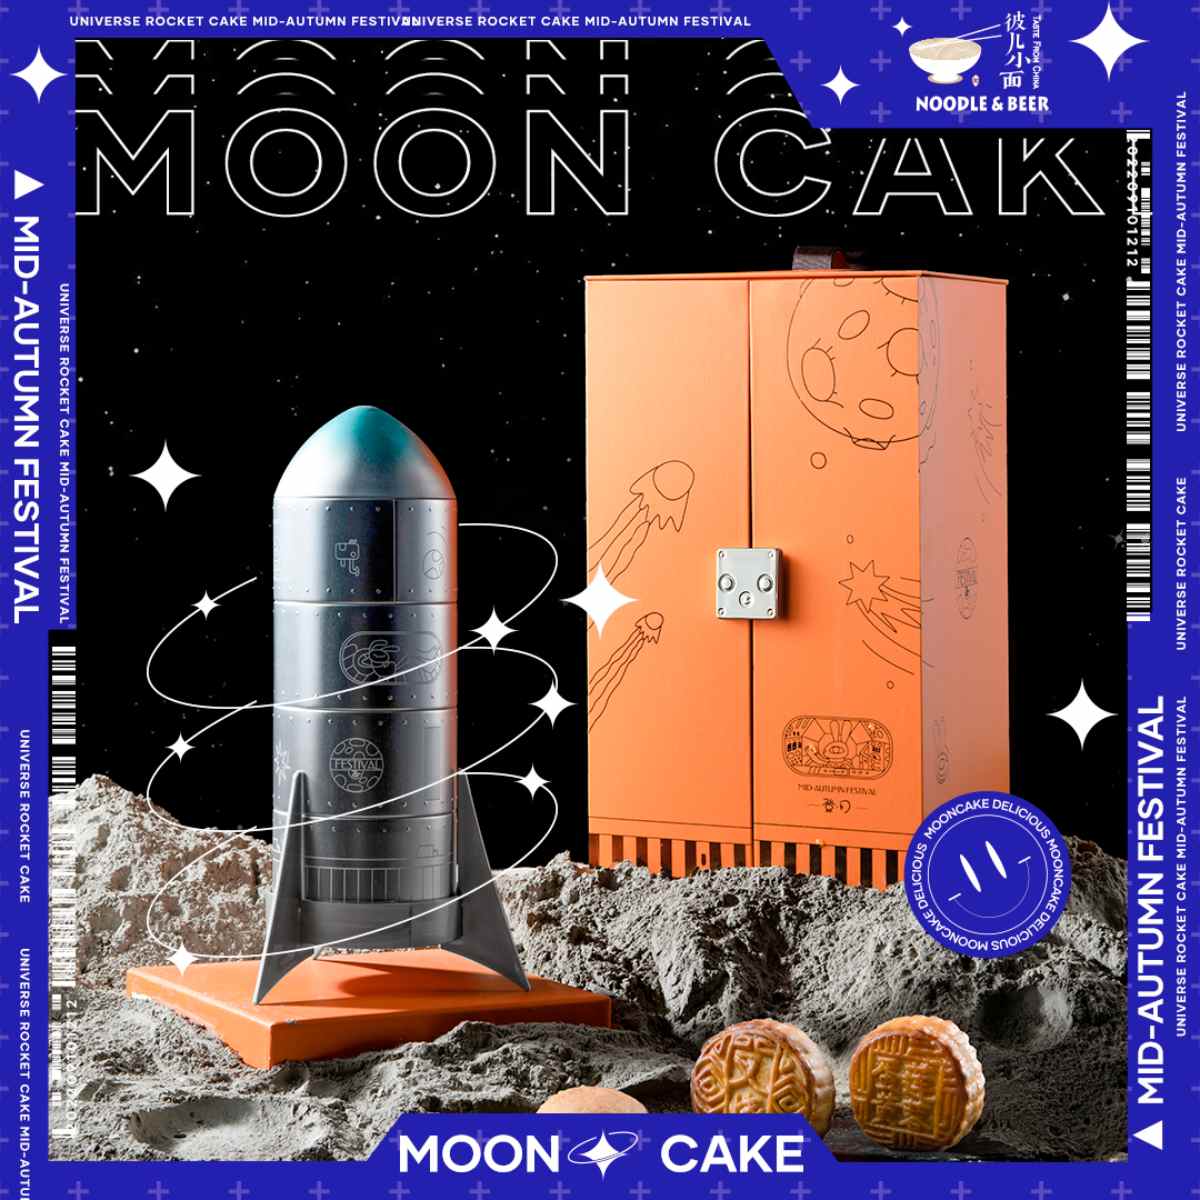 Yunnan mooncakes in a space rocket stand